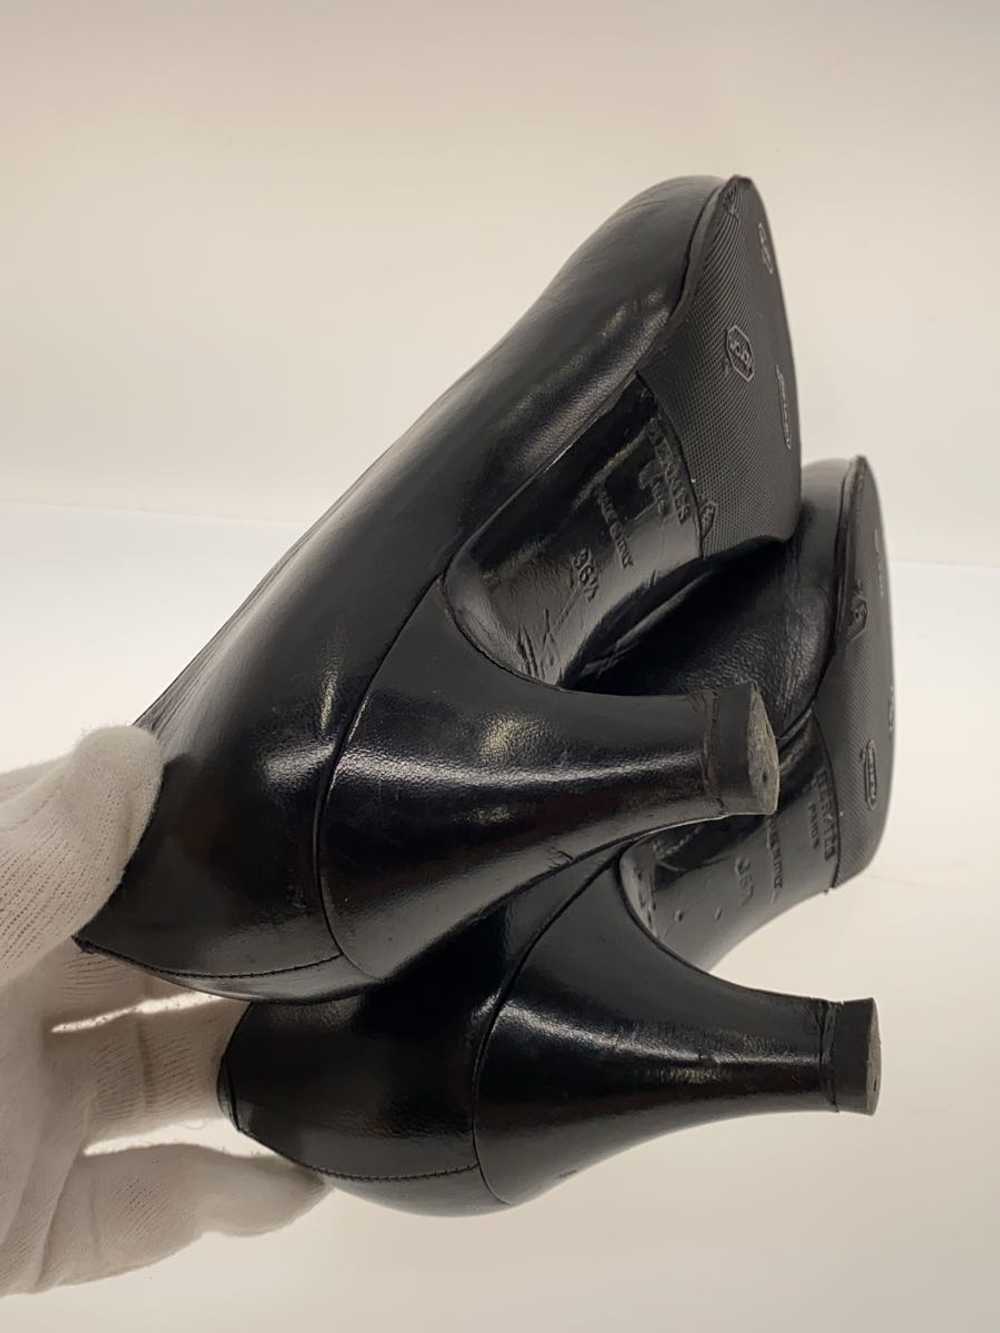 Hermes Pumps/36.5/Black/Scratches/Scratches On To… - image 4